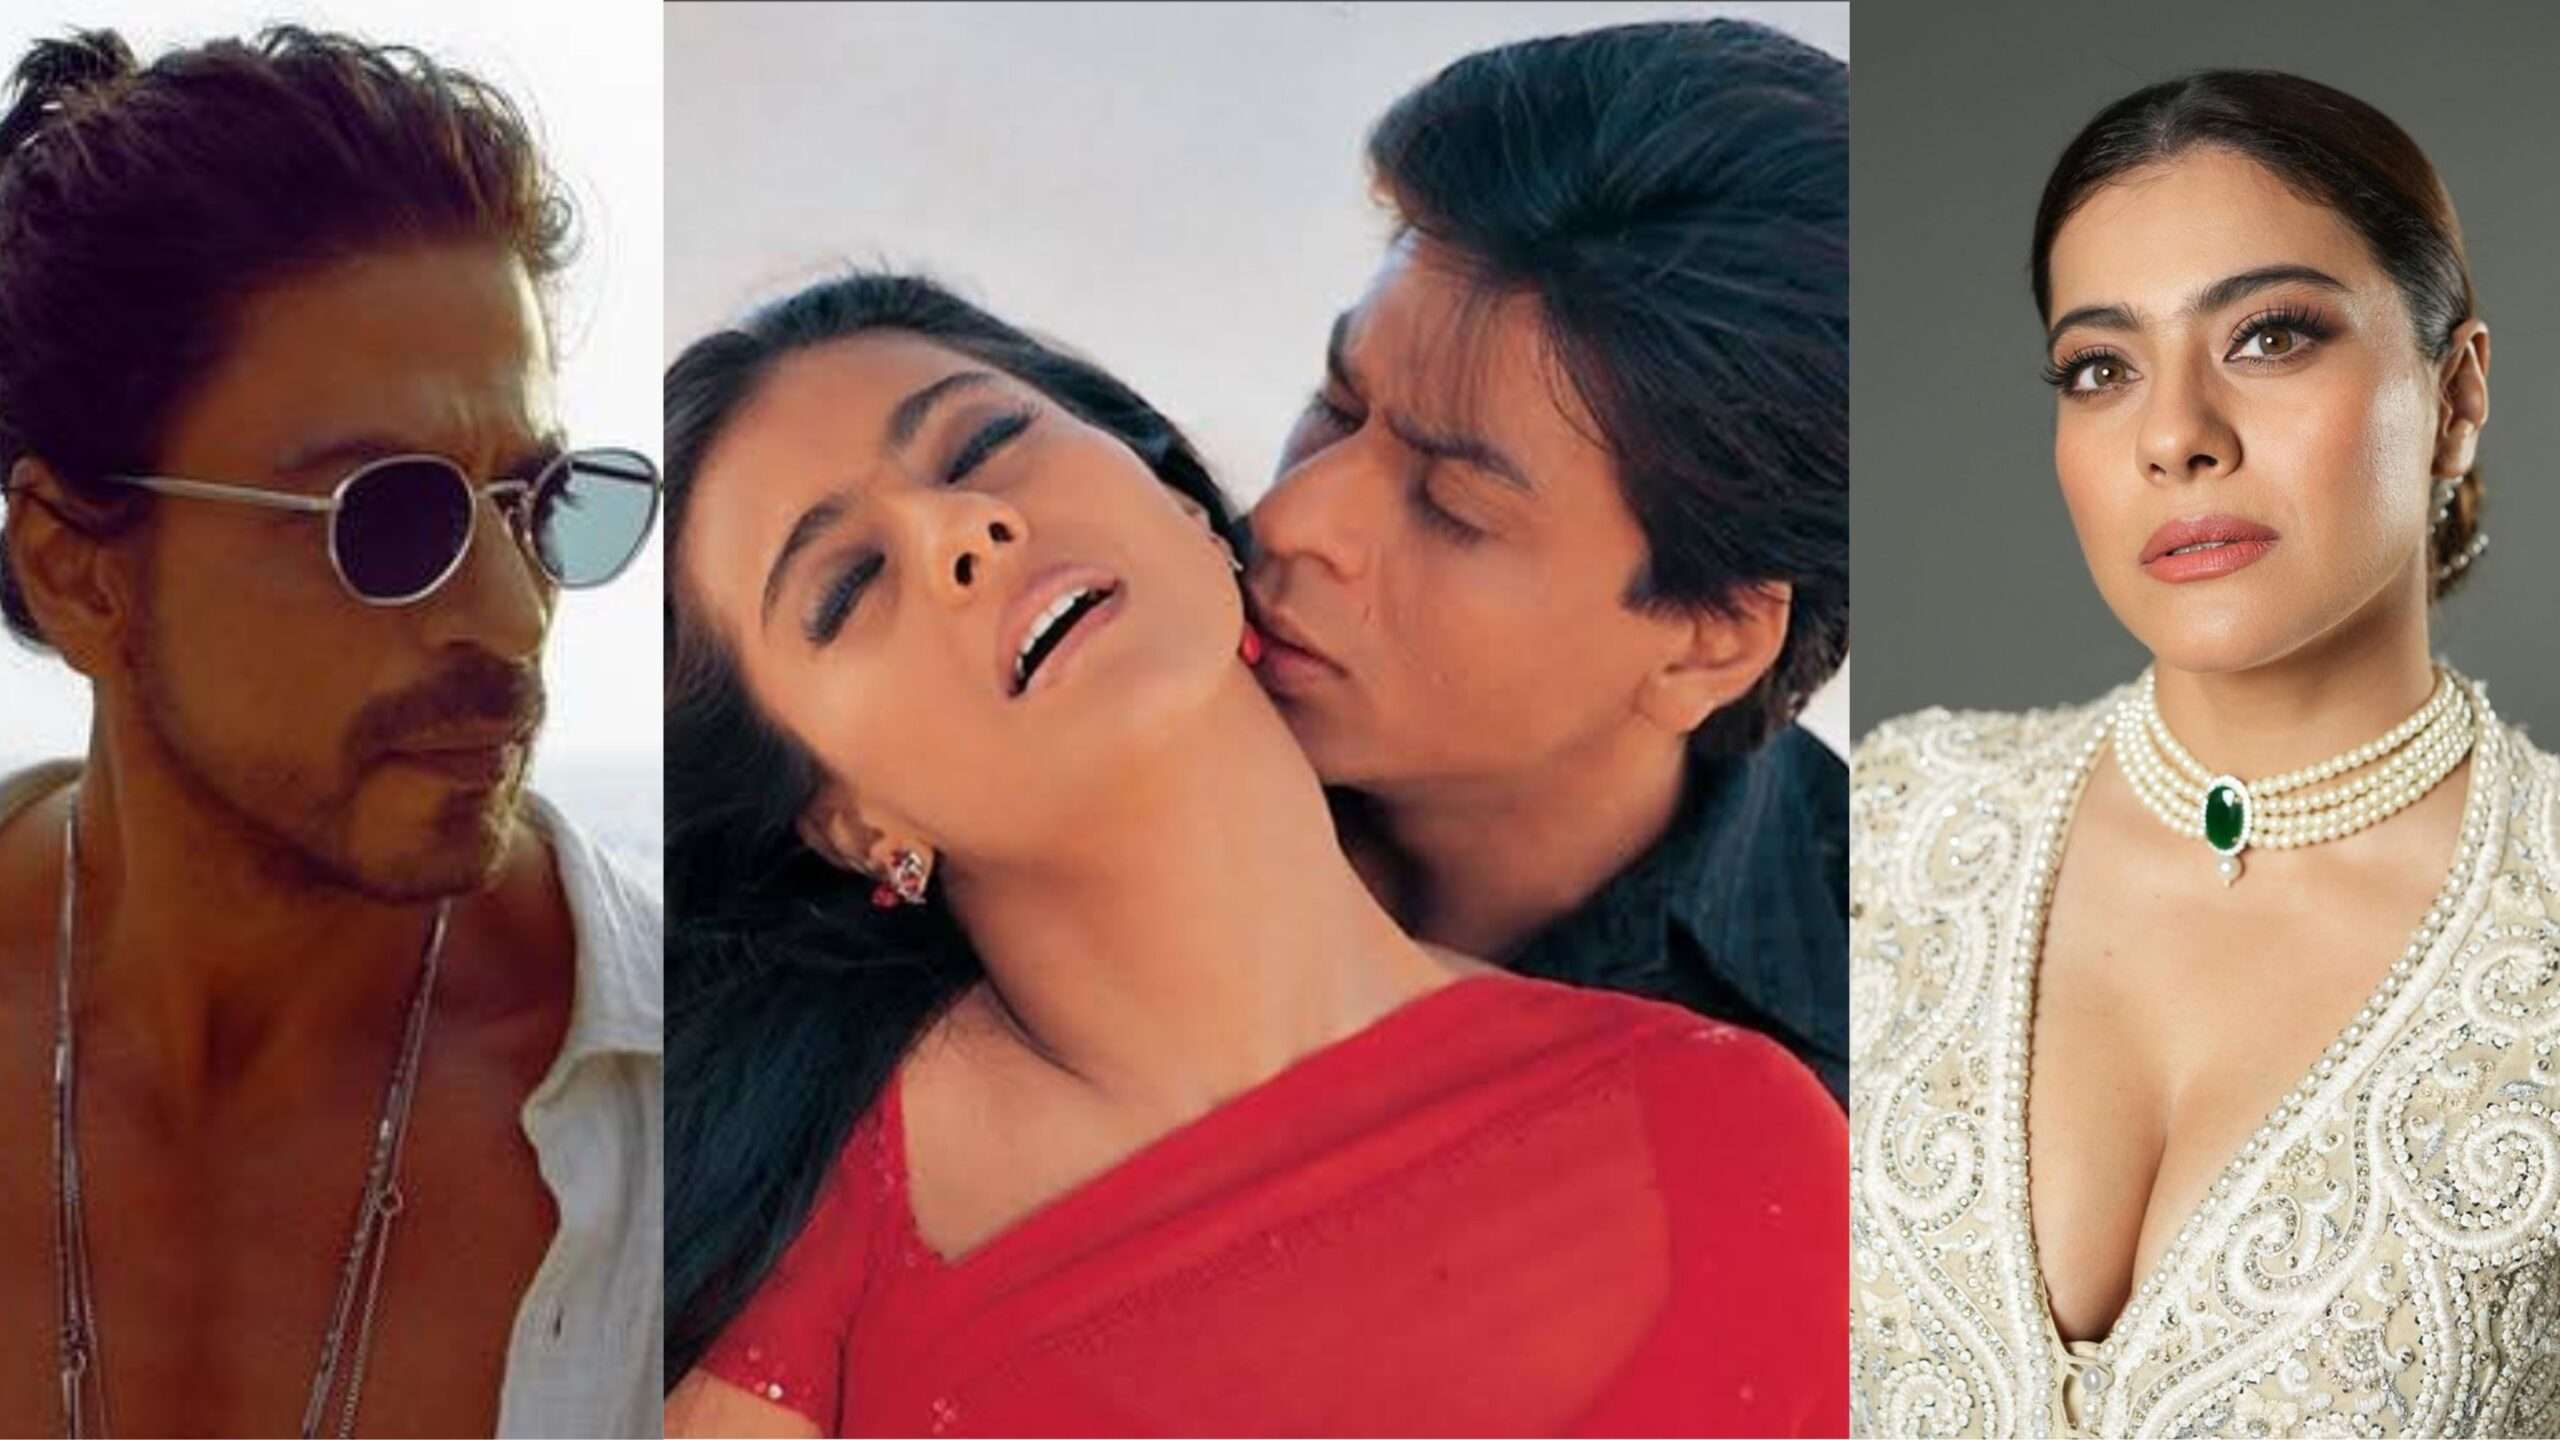 Shah Rukh Khan and Kajol are romance icons, never be replaced